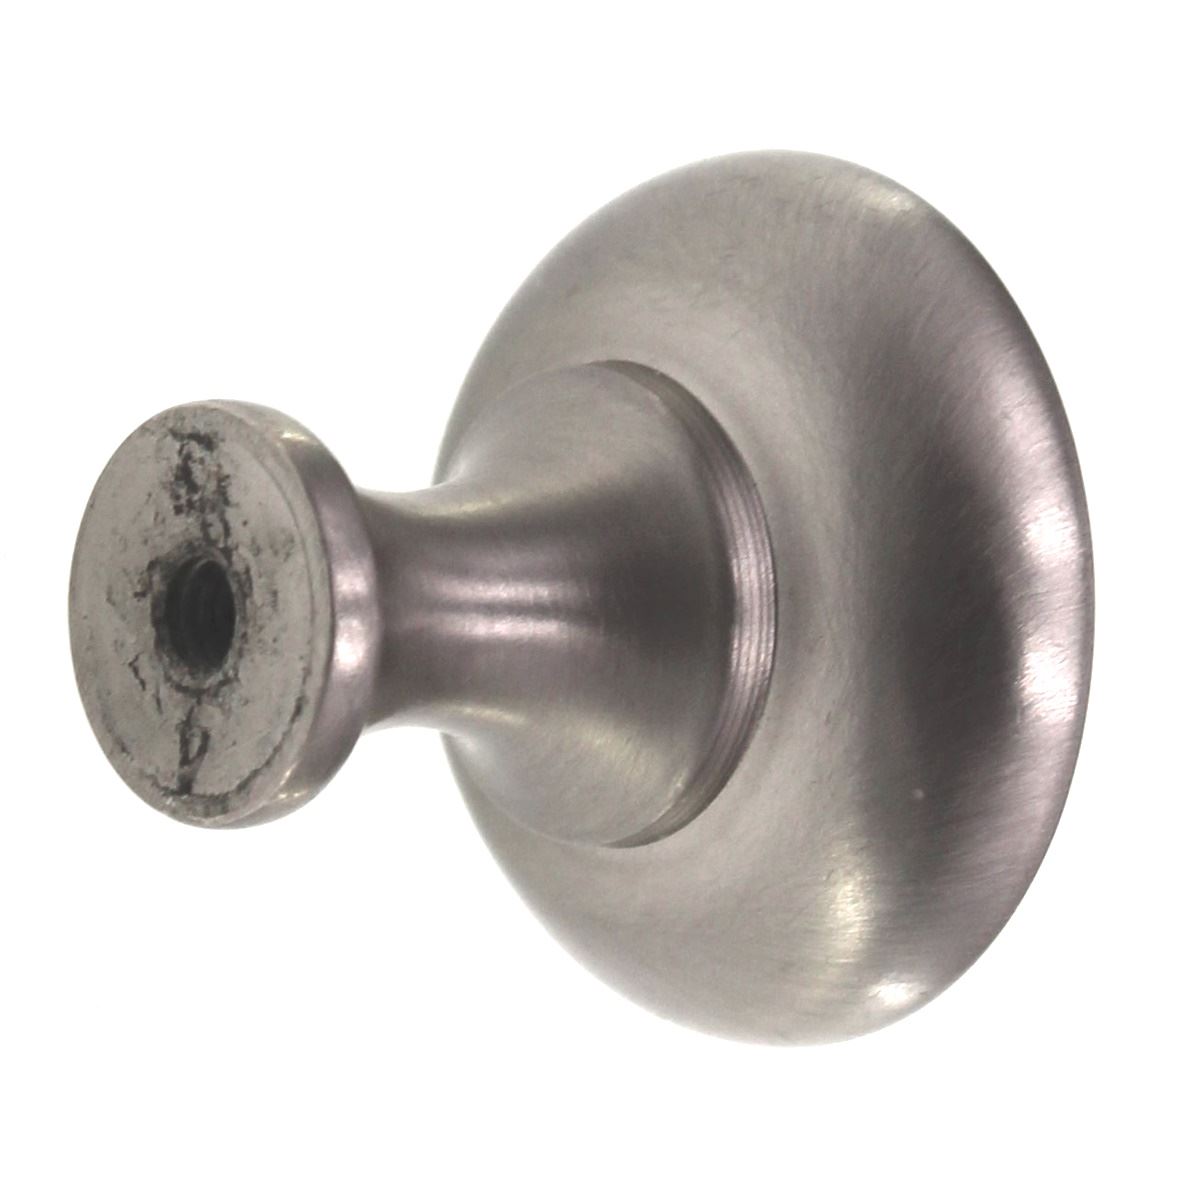 Century Kentwood Dull Satin Nickel 1 1/4" Dotted Cabinet Knob 22926-DSN